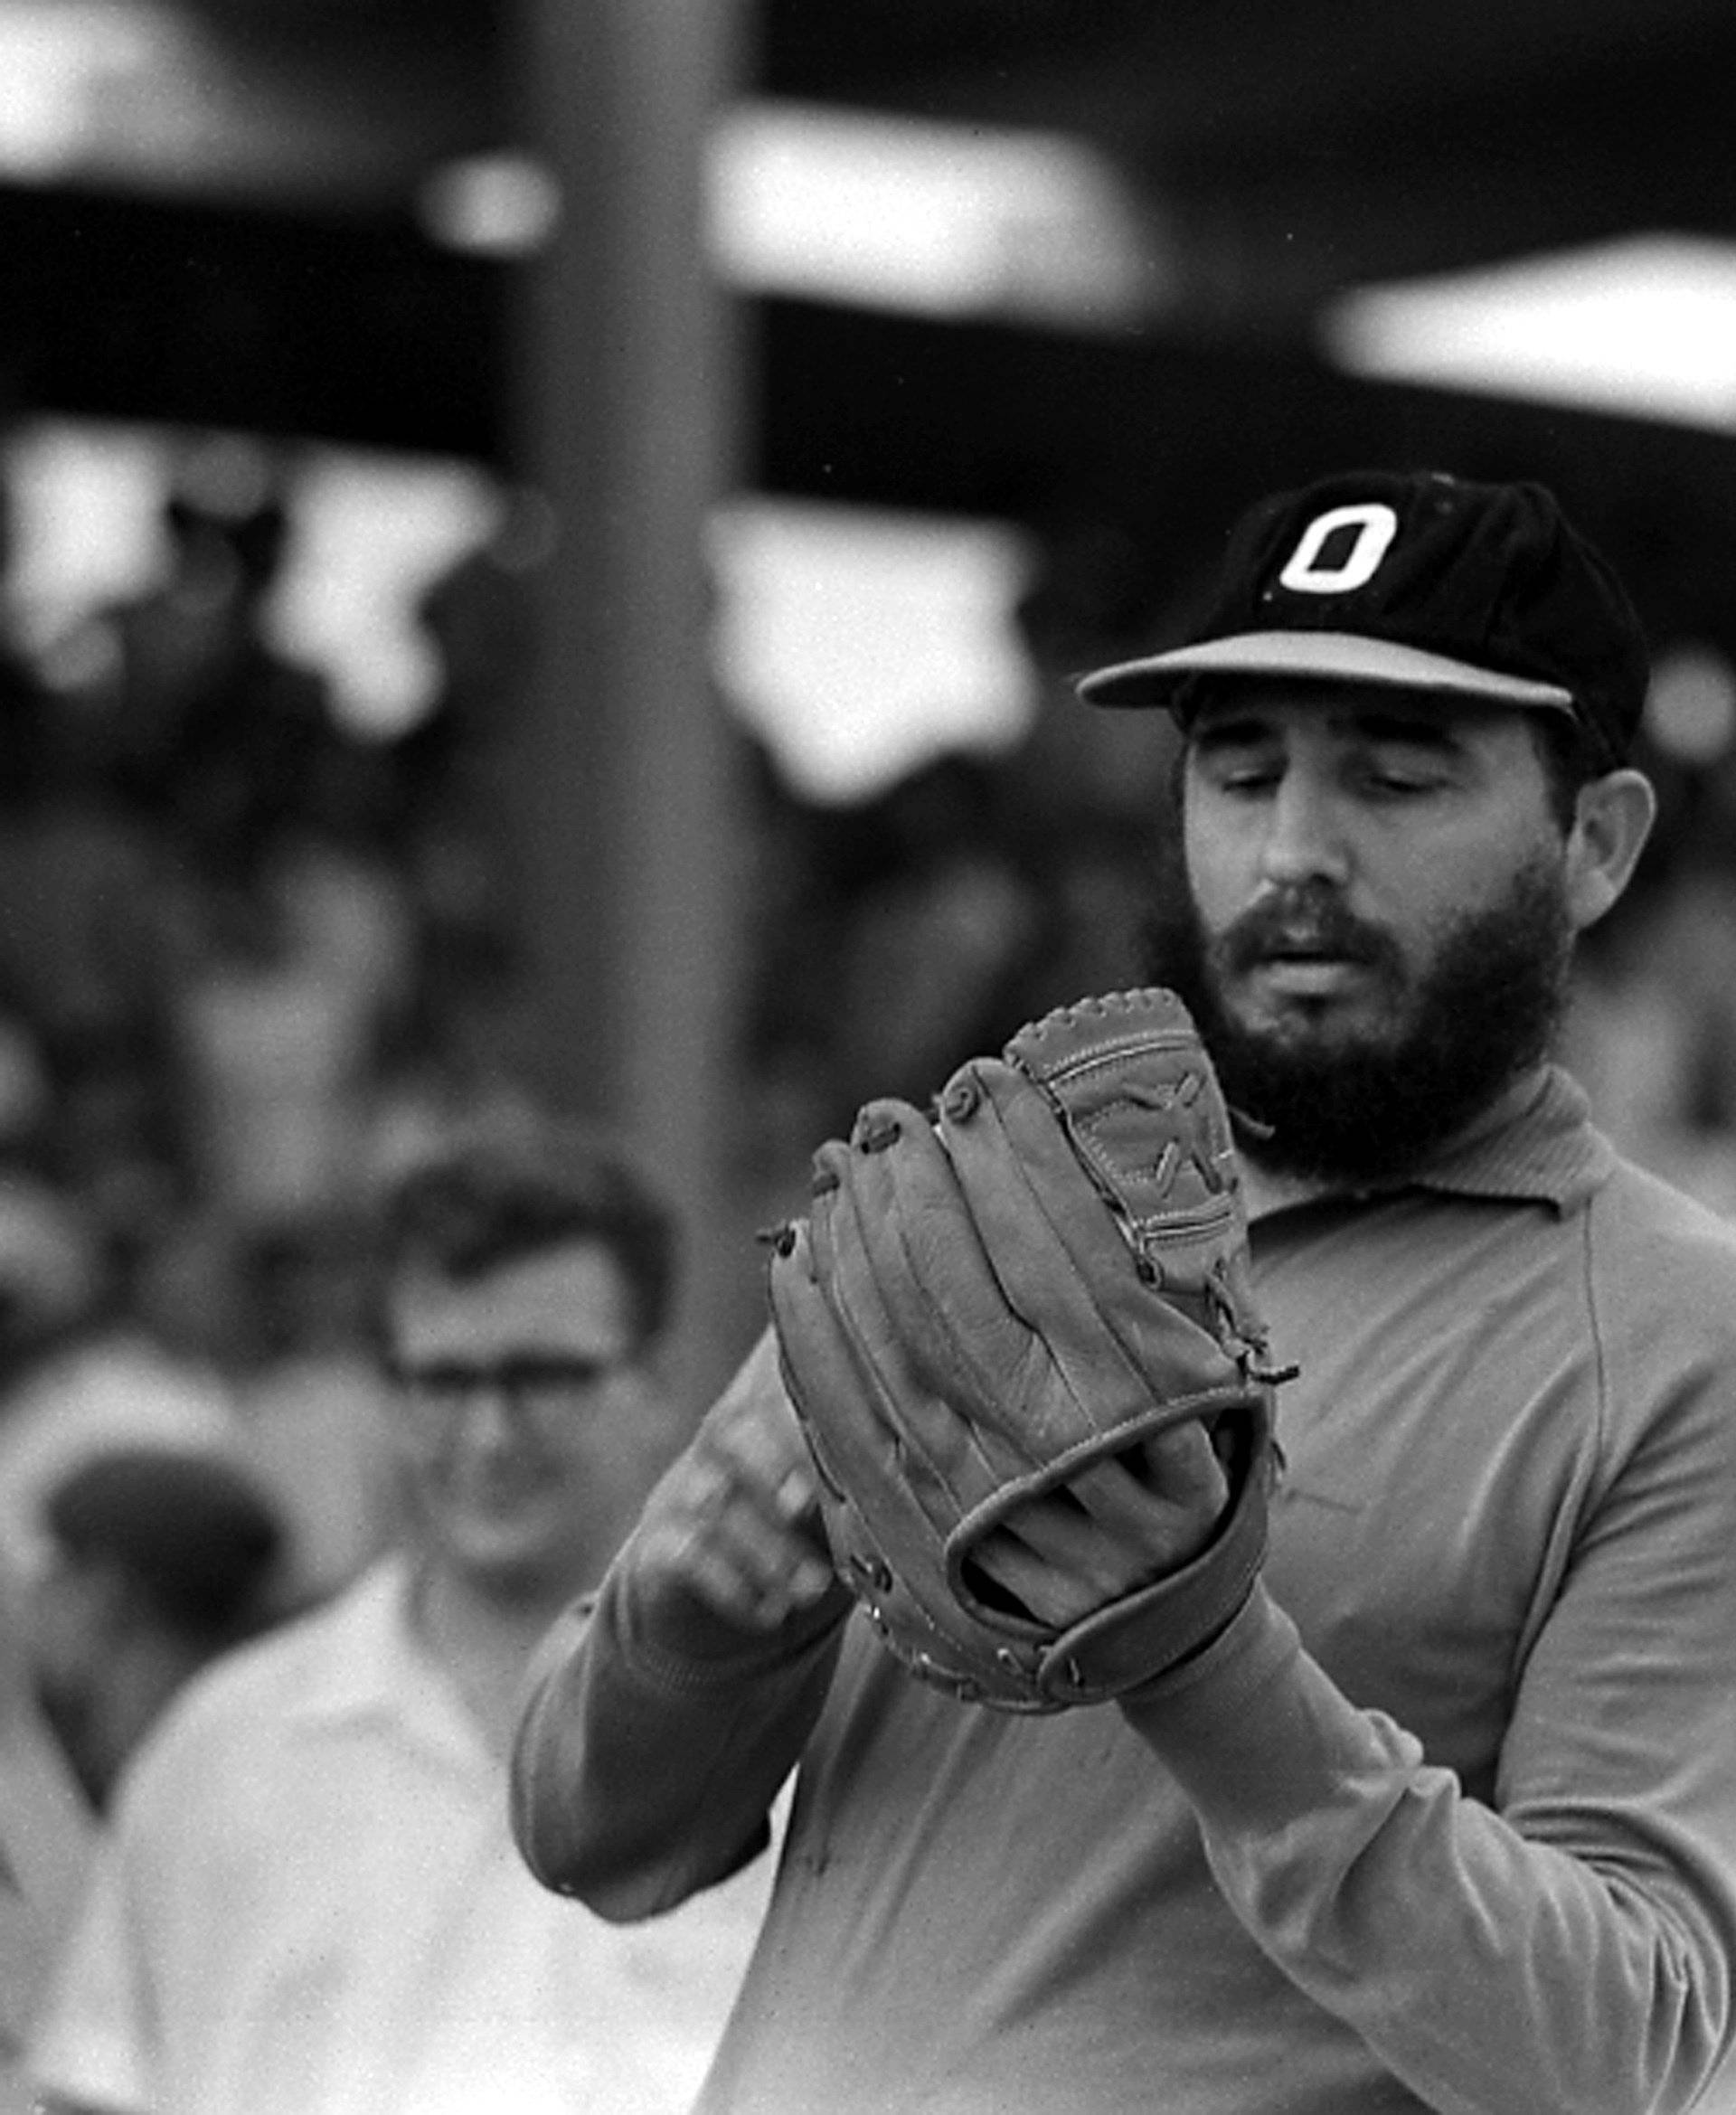 File photo of then Cuban Prime Minister Fidel Castro playing baseball in Havana